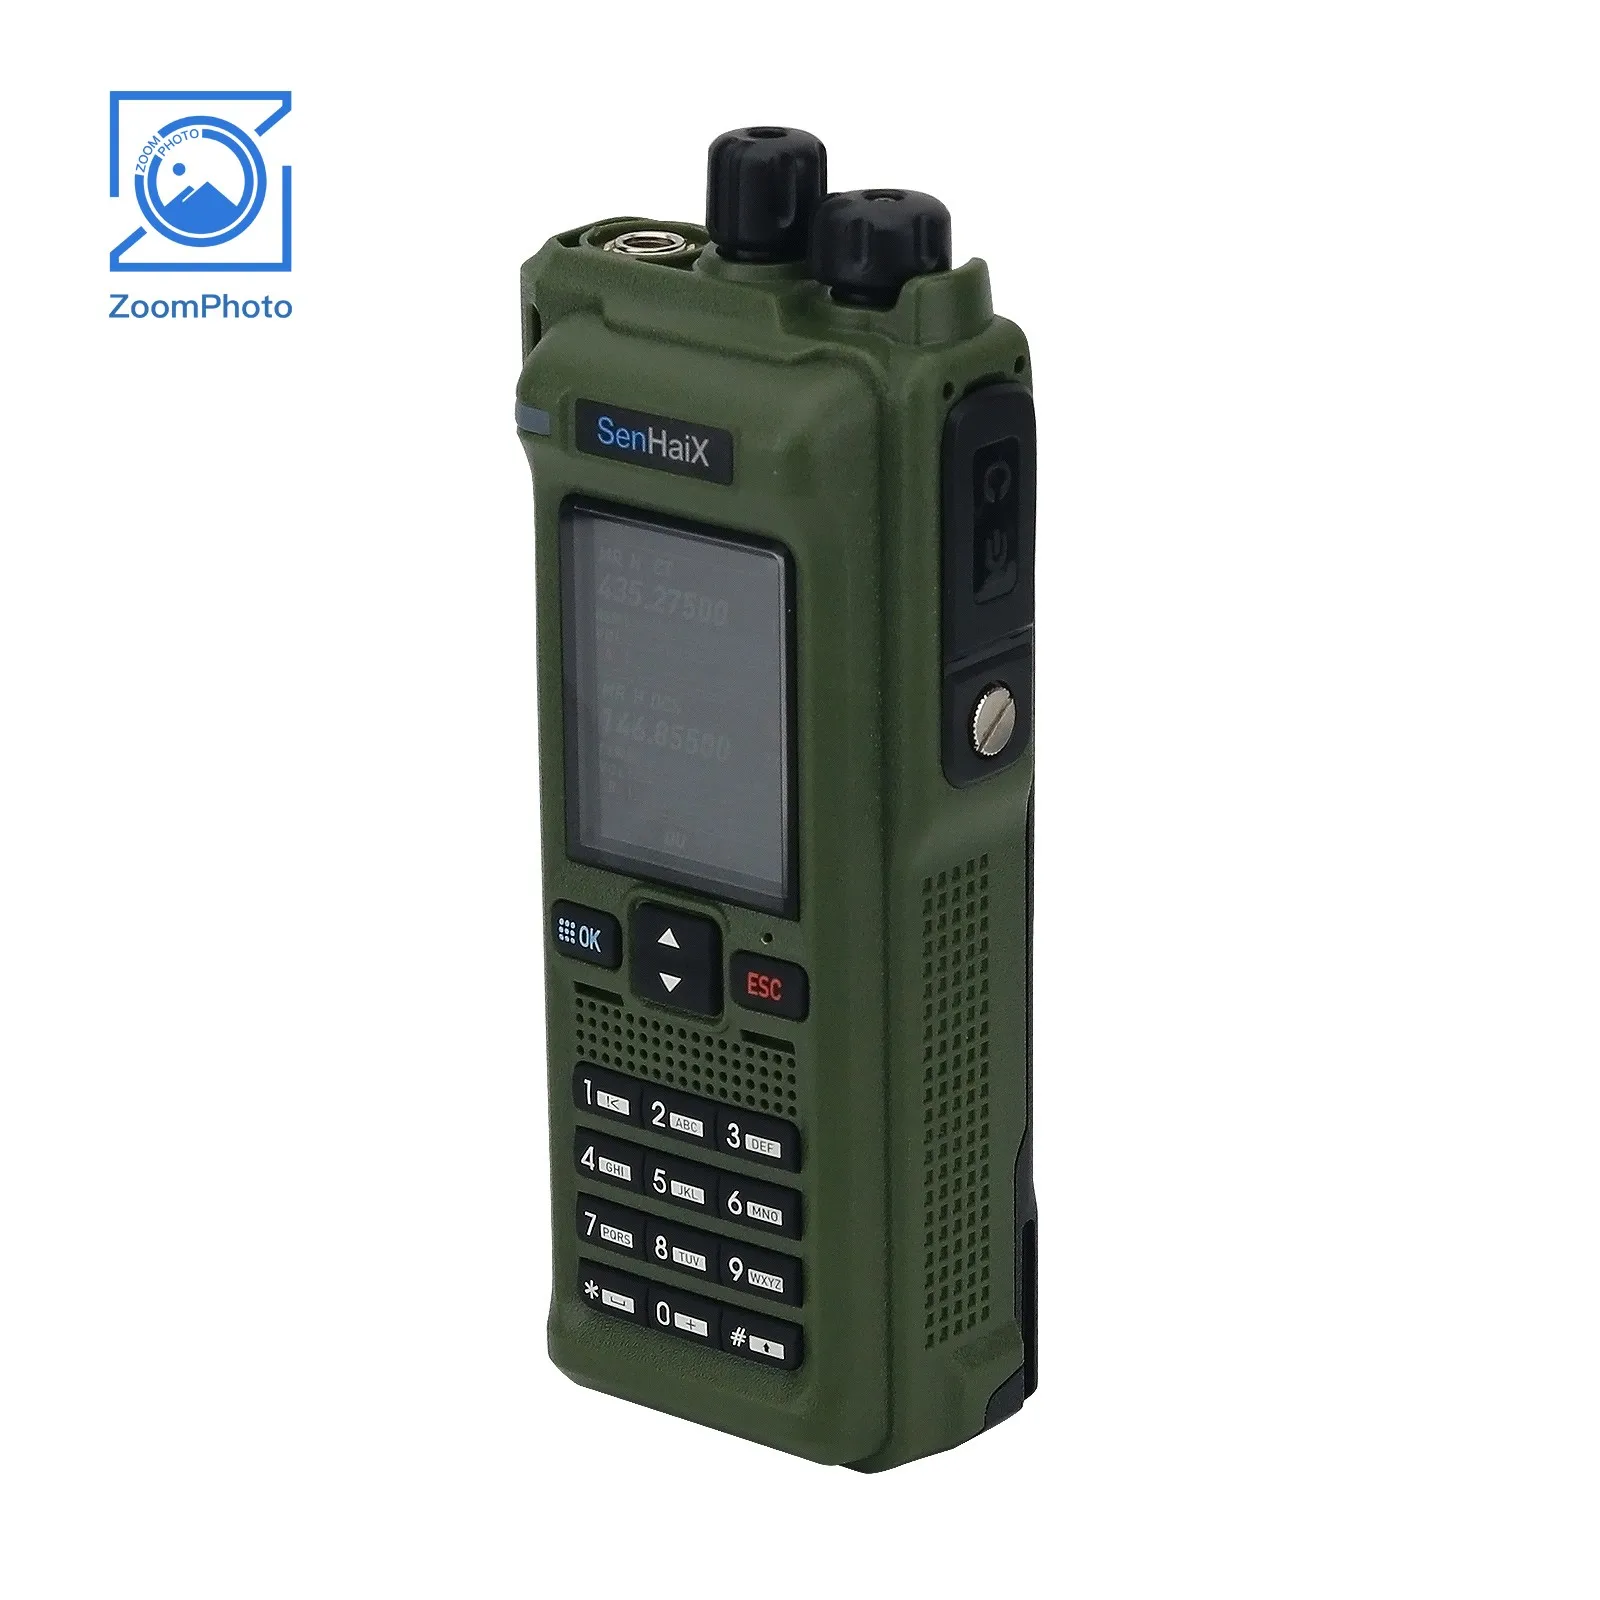 GT-12 10W Multi-band Handheld Walkie Talkie 2-Inch LED Color Screen Built-in Bluetooth Support FM/AM/UHF/VHF